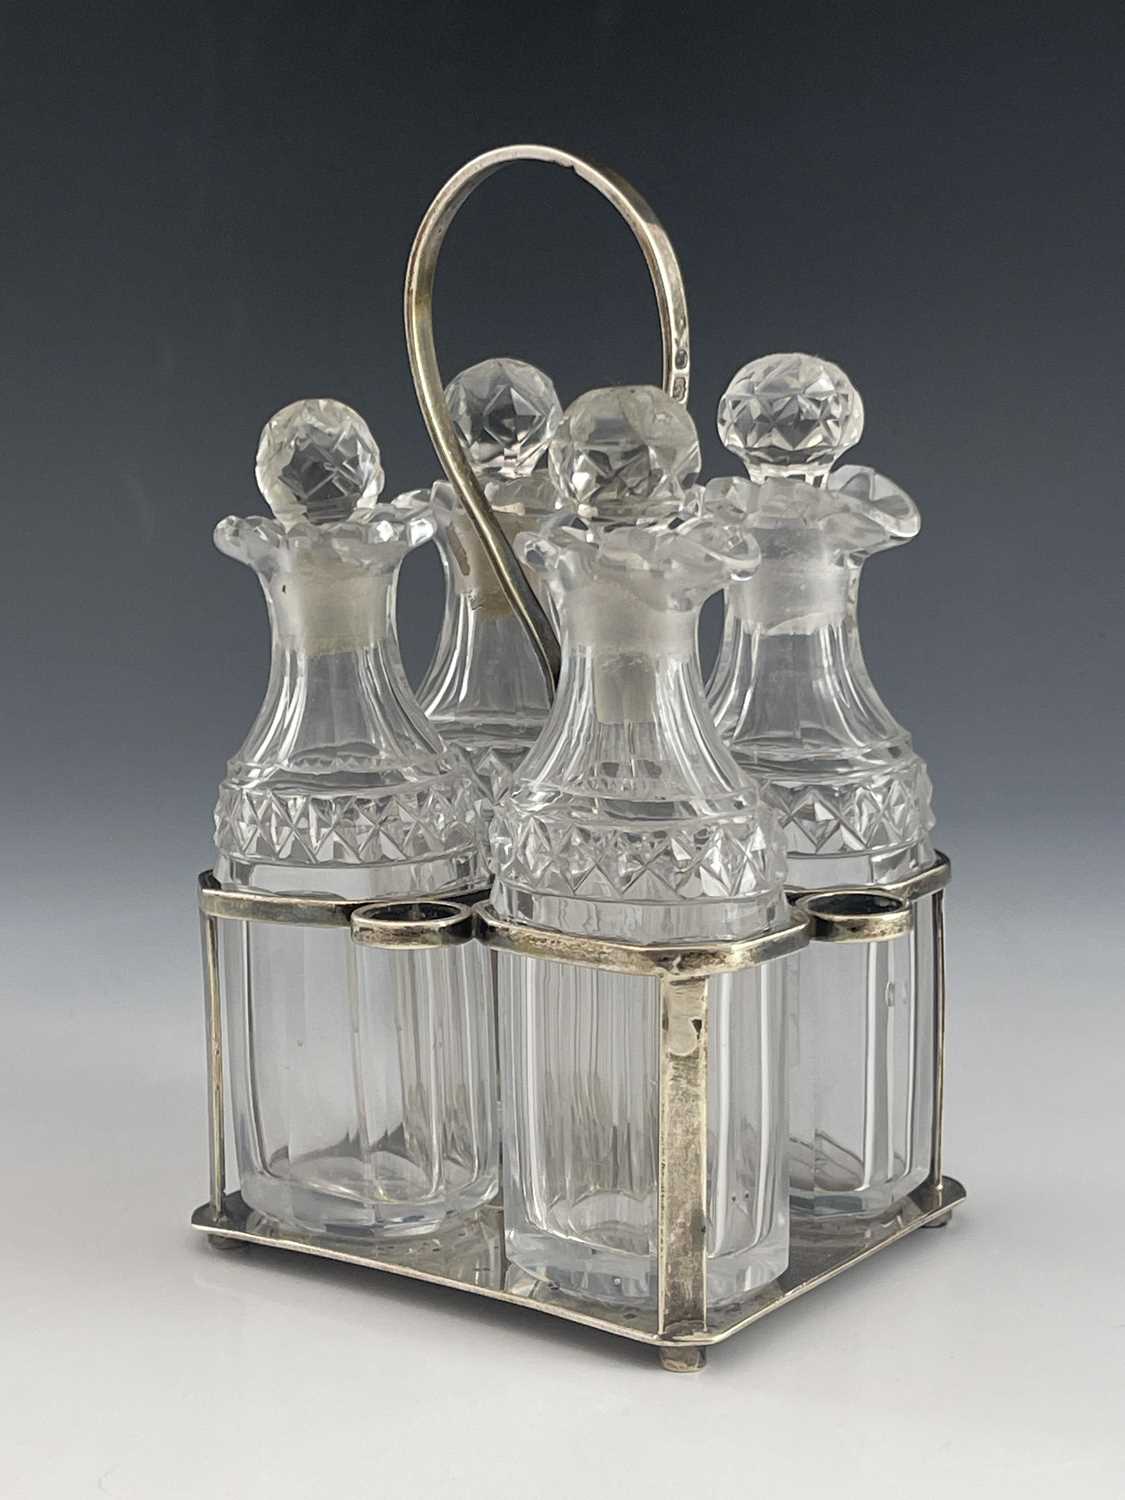 Lot 95 - A George III silver and cut glass cruet and stand, Thomas Wallis, London 1807